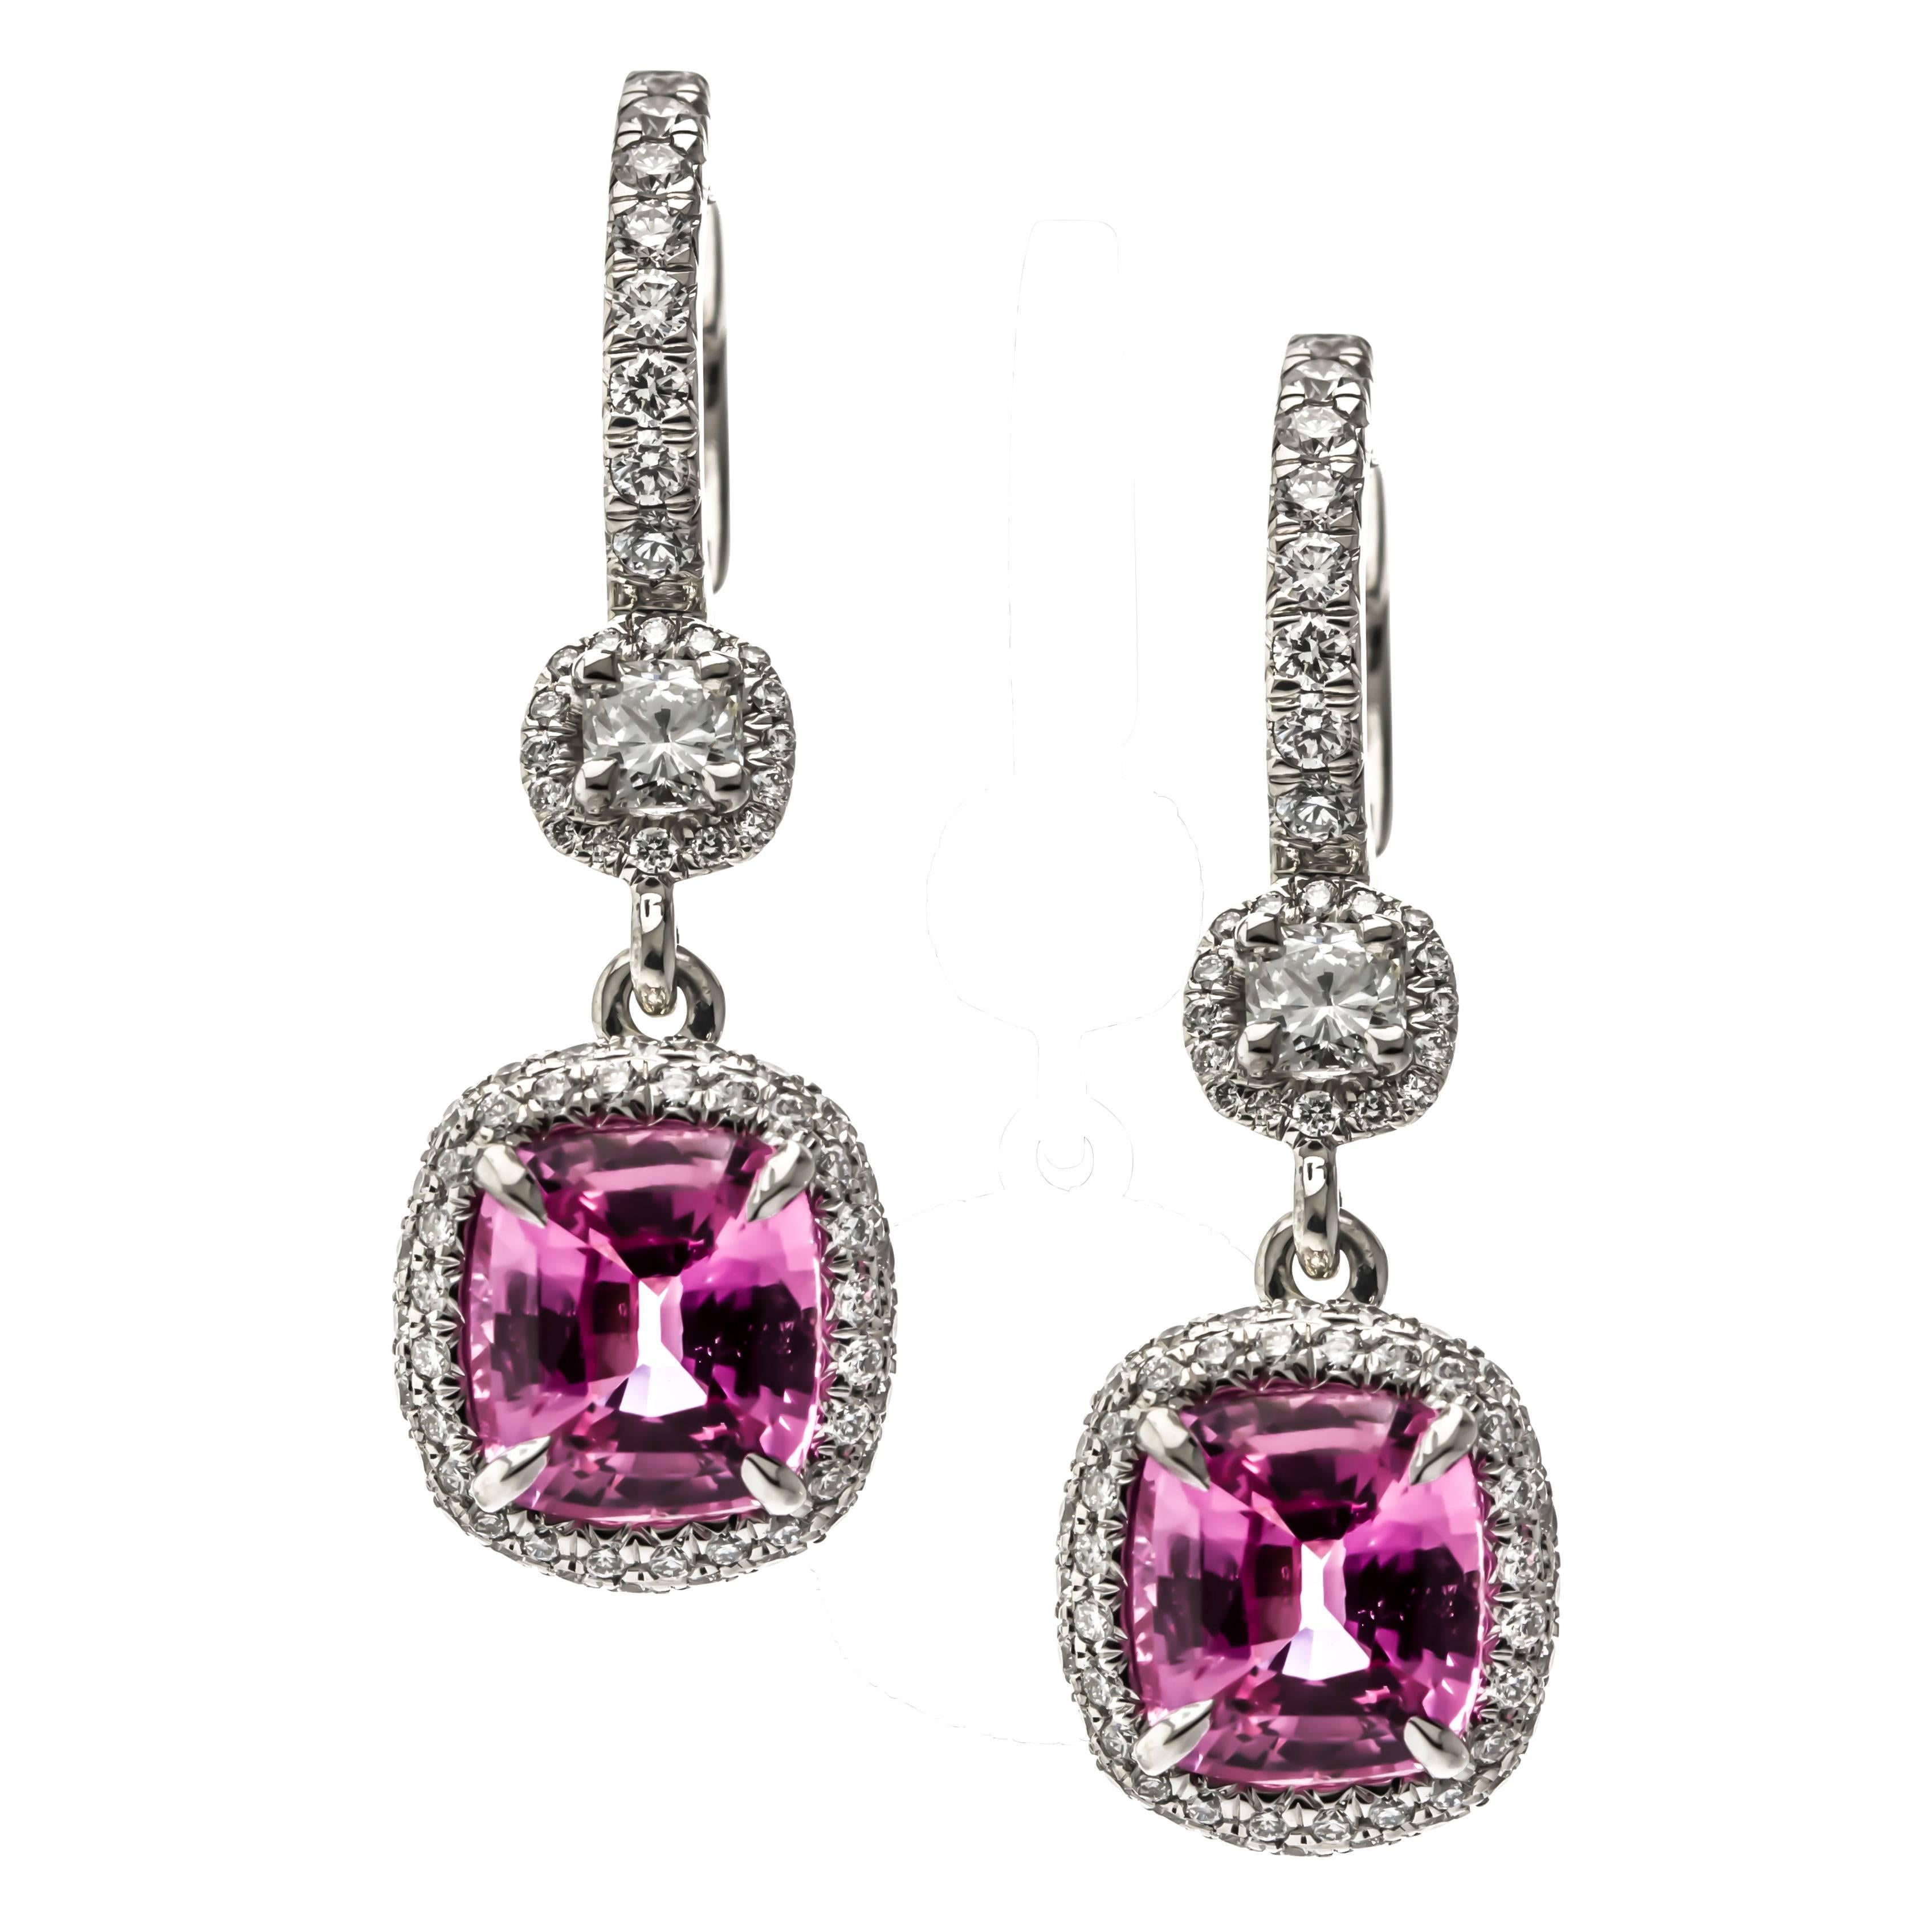 One of a Kind 5.03 Carat Pink Sapphire Diamond Earrings For Sale